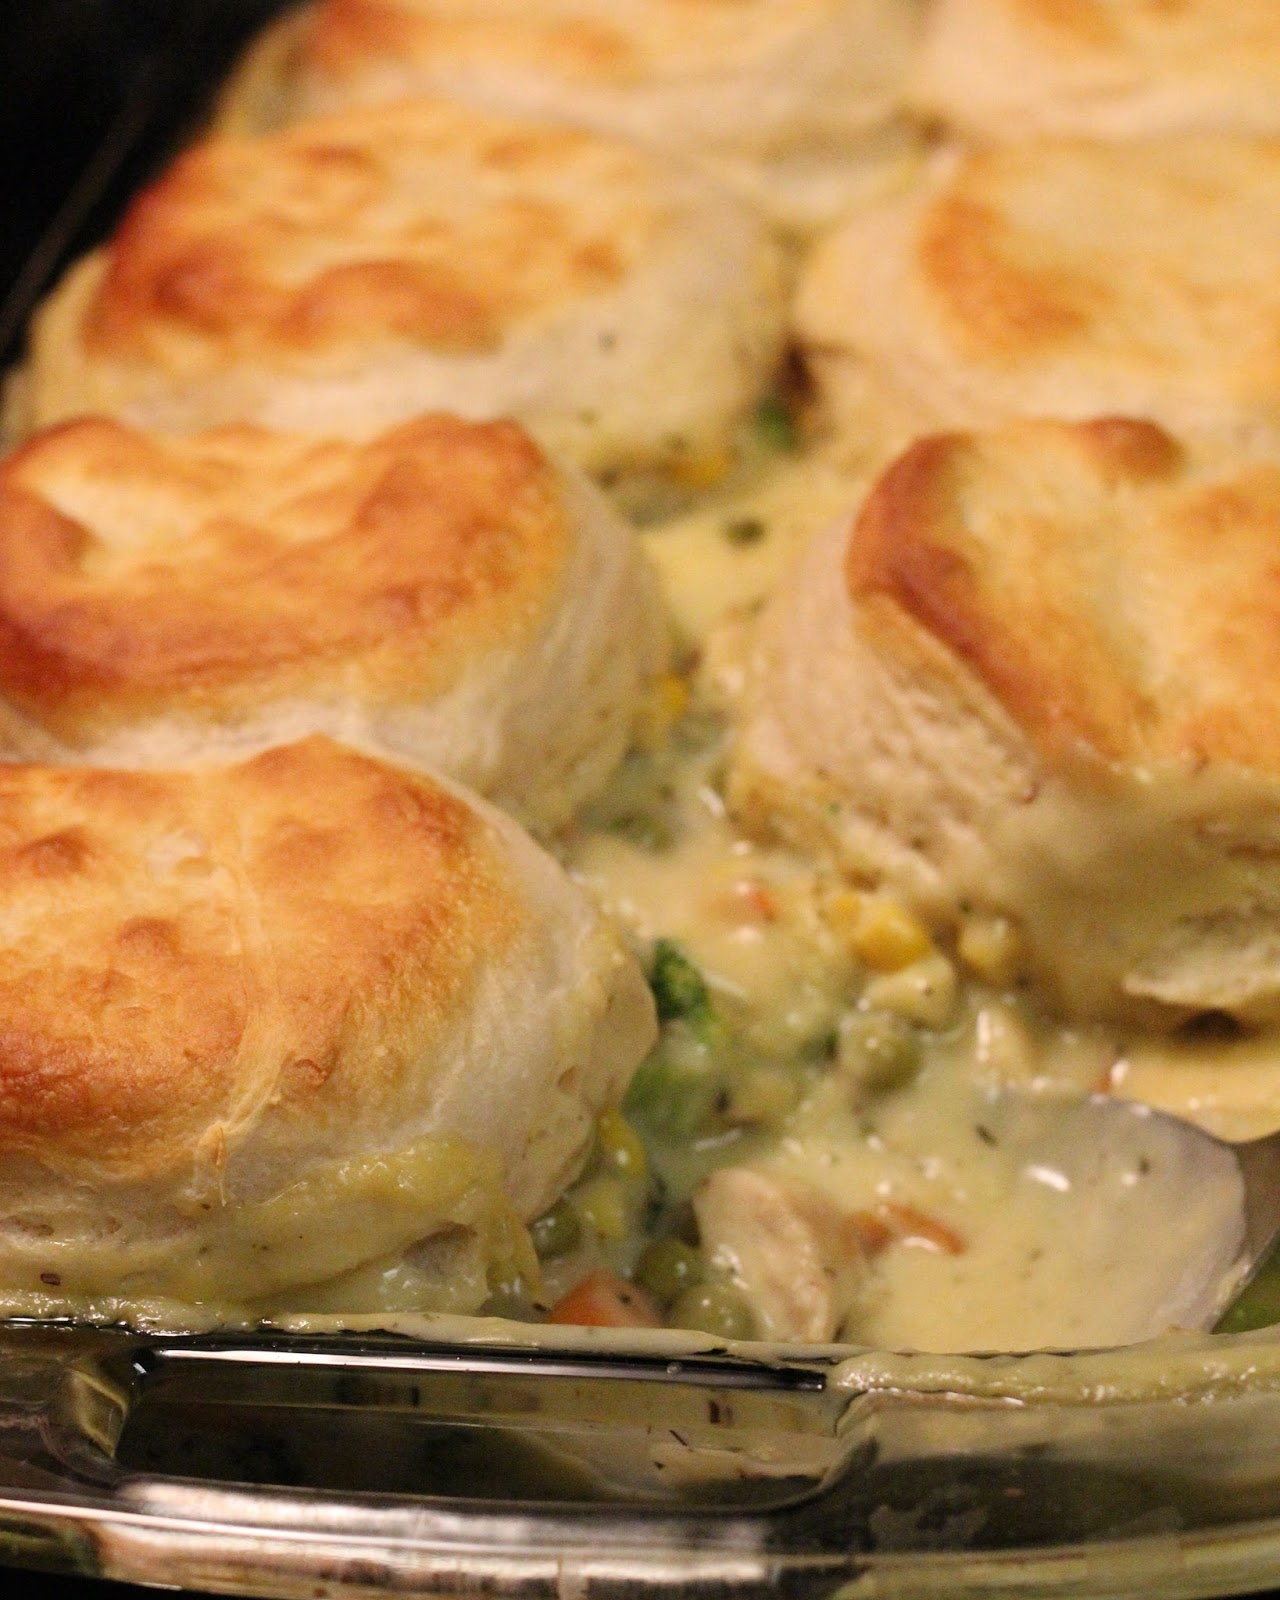 Tasty Tuesday: Biscuit Chicken Pot Pie | For the Joy of Life.